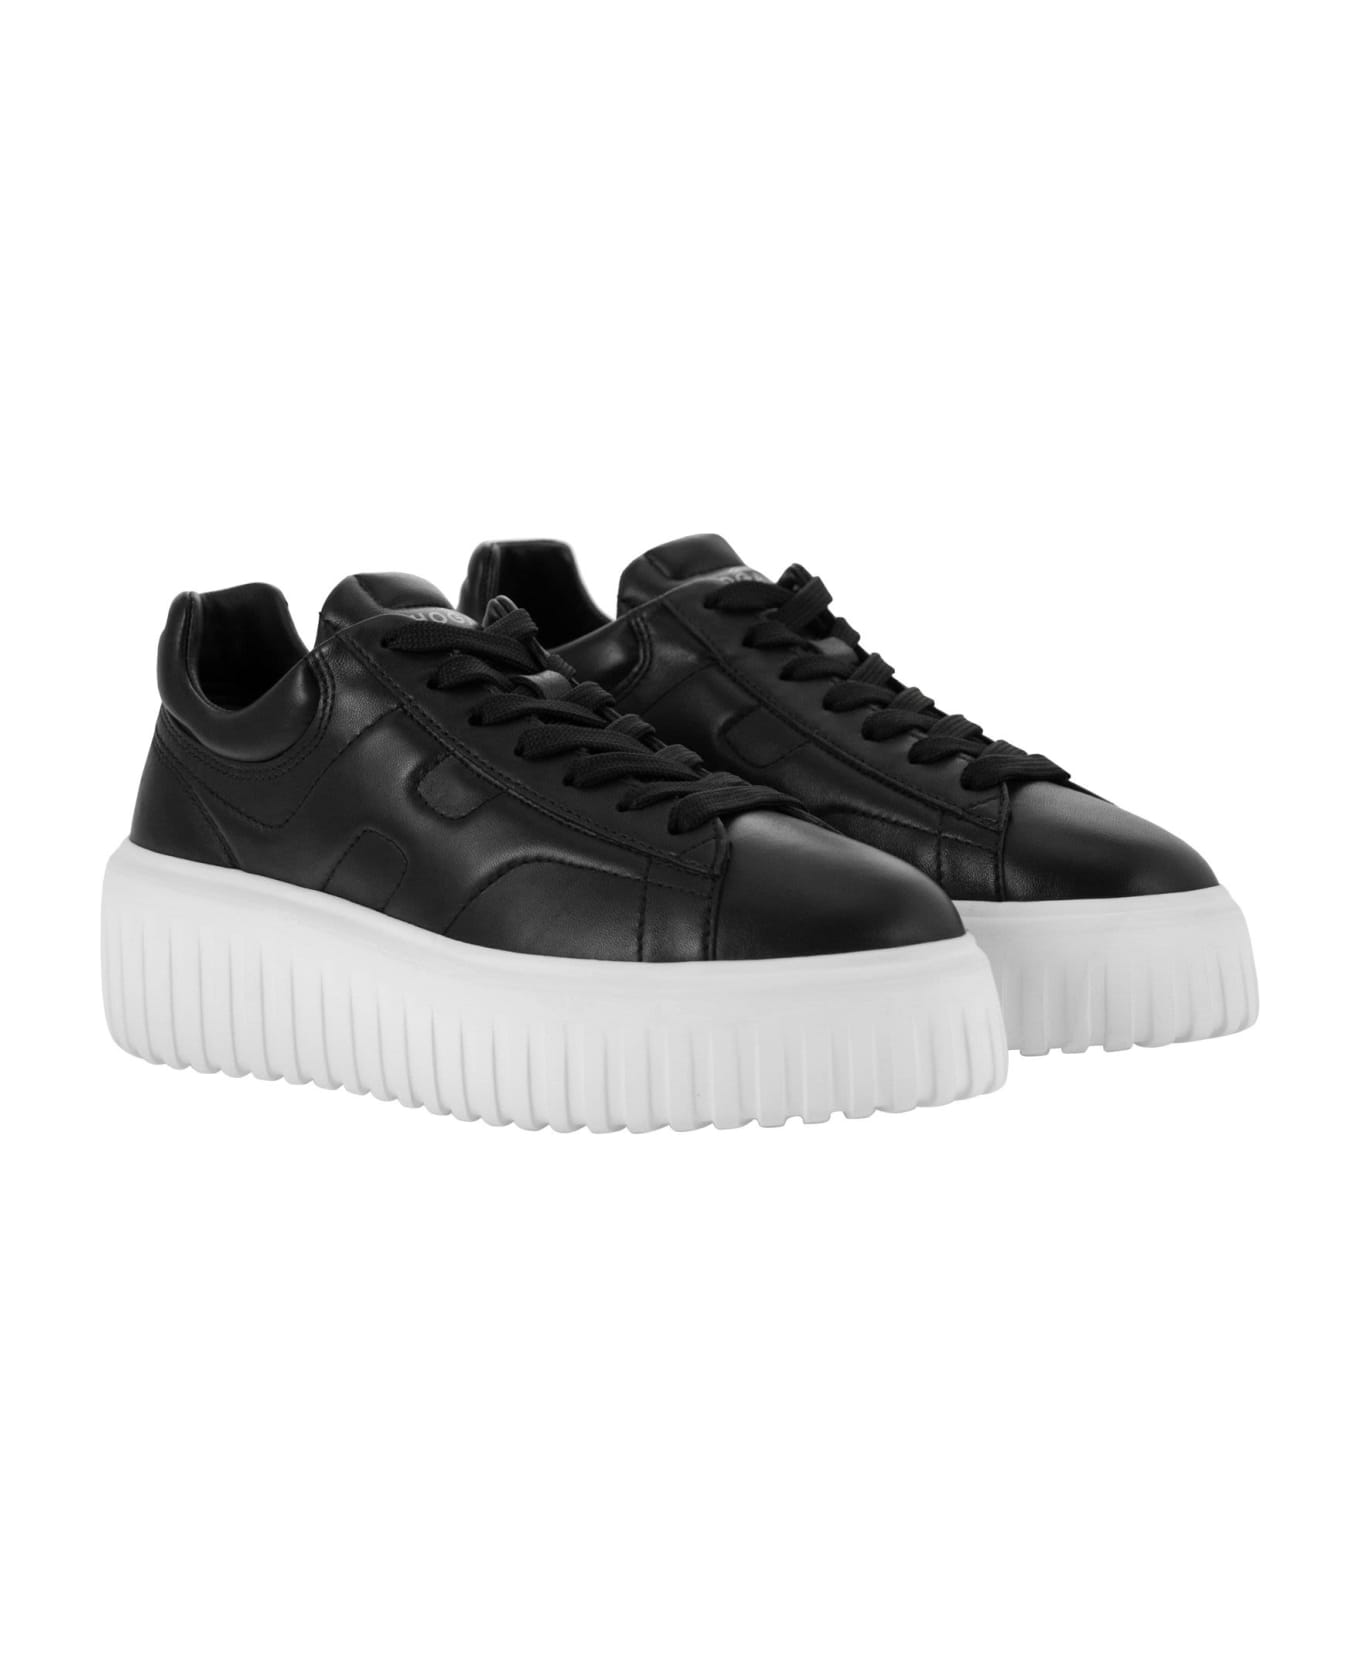 Hogan H-stripes Sneakers In Nappa Leather - Black/white ウェッジシューズ